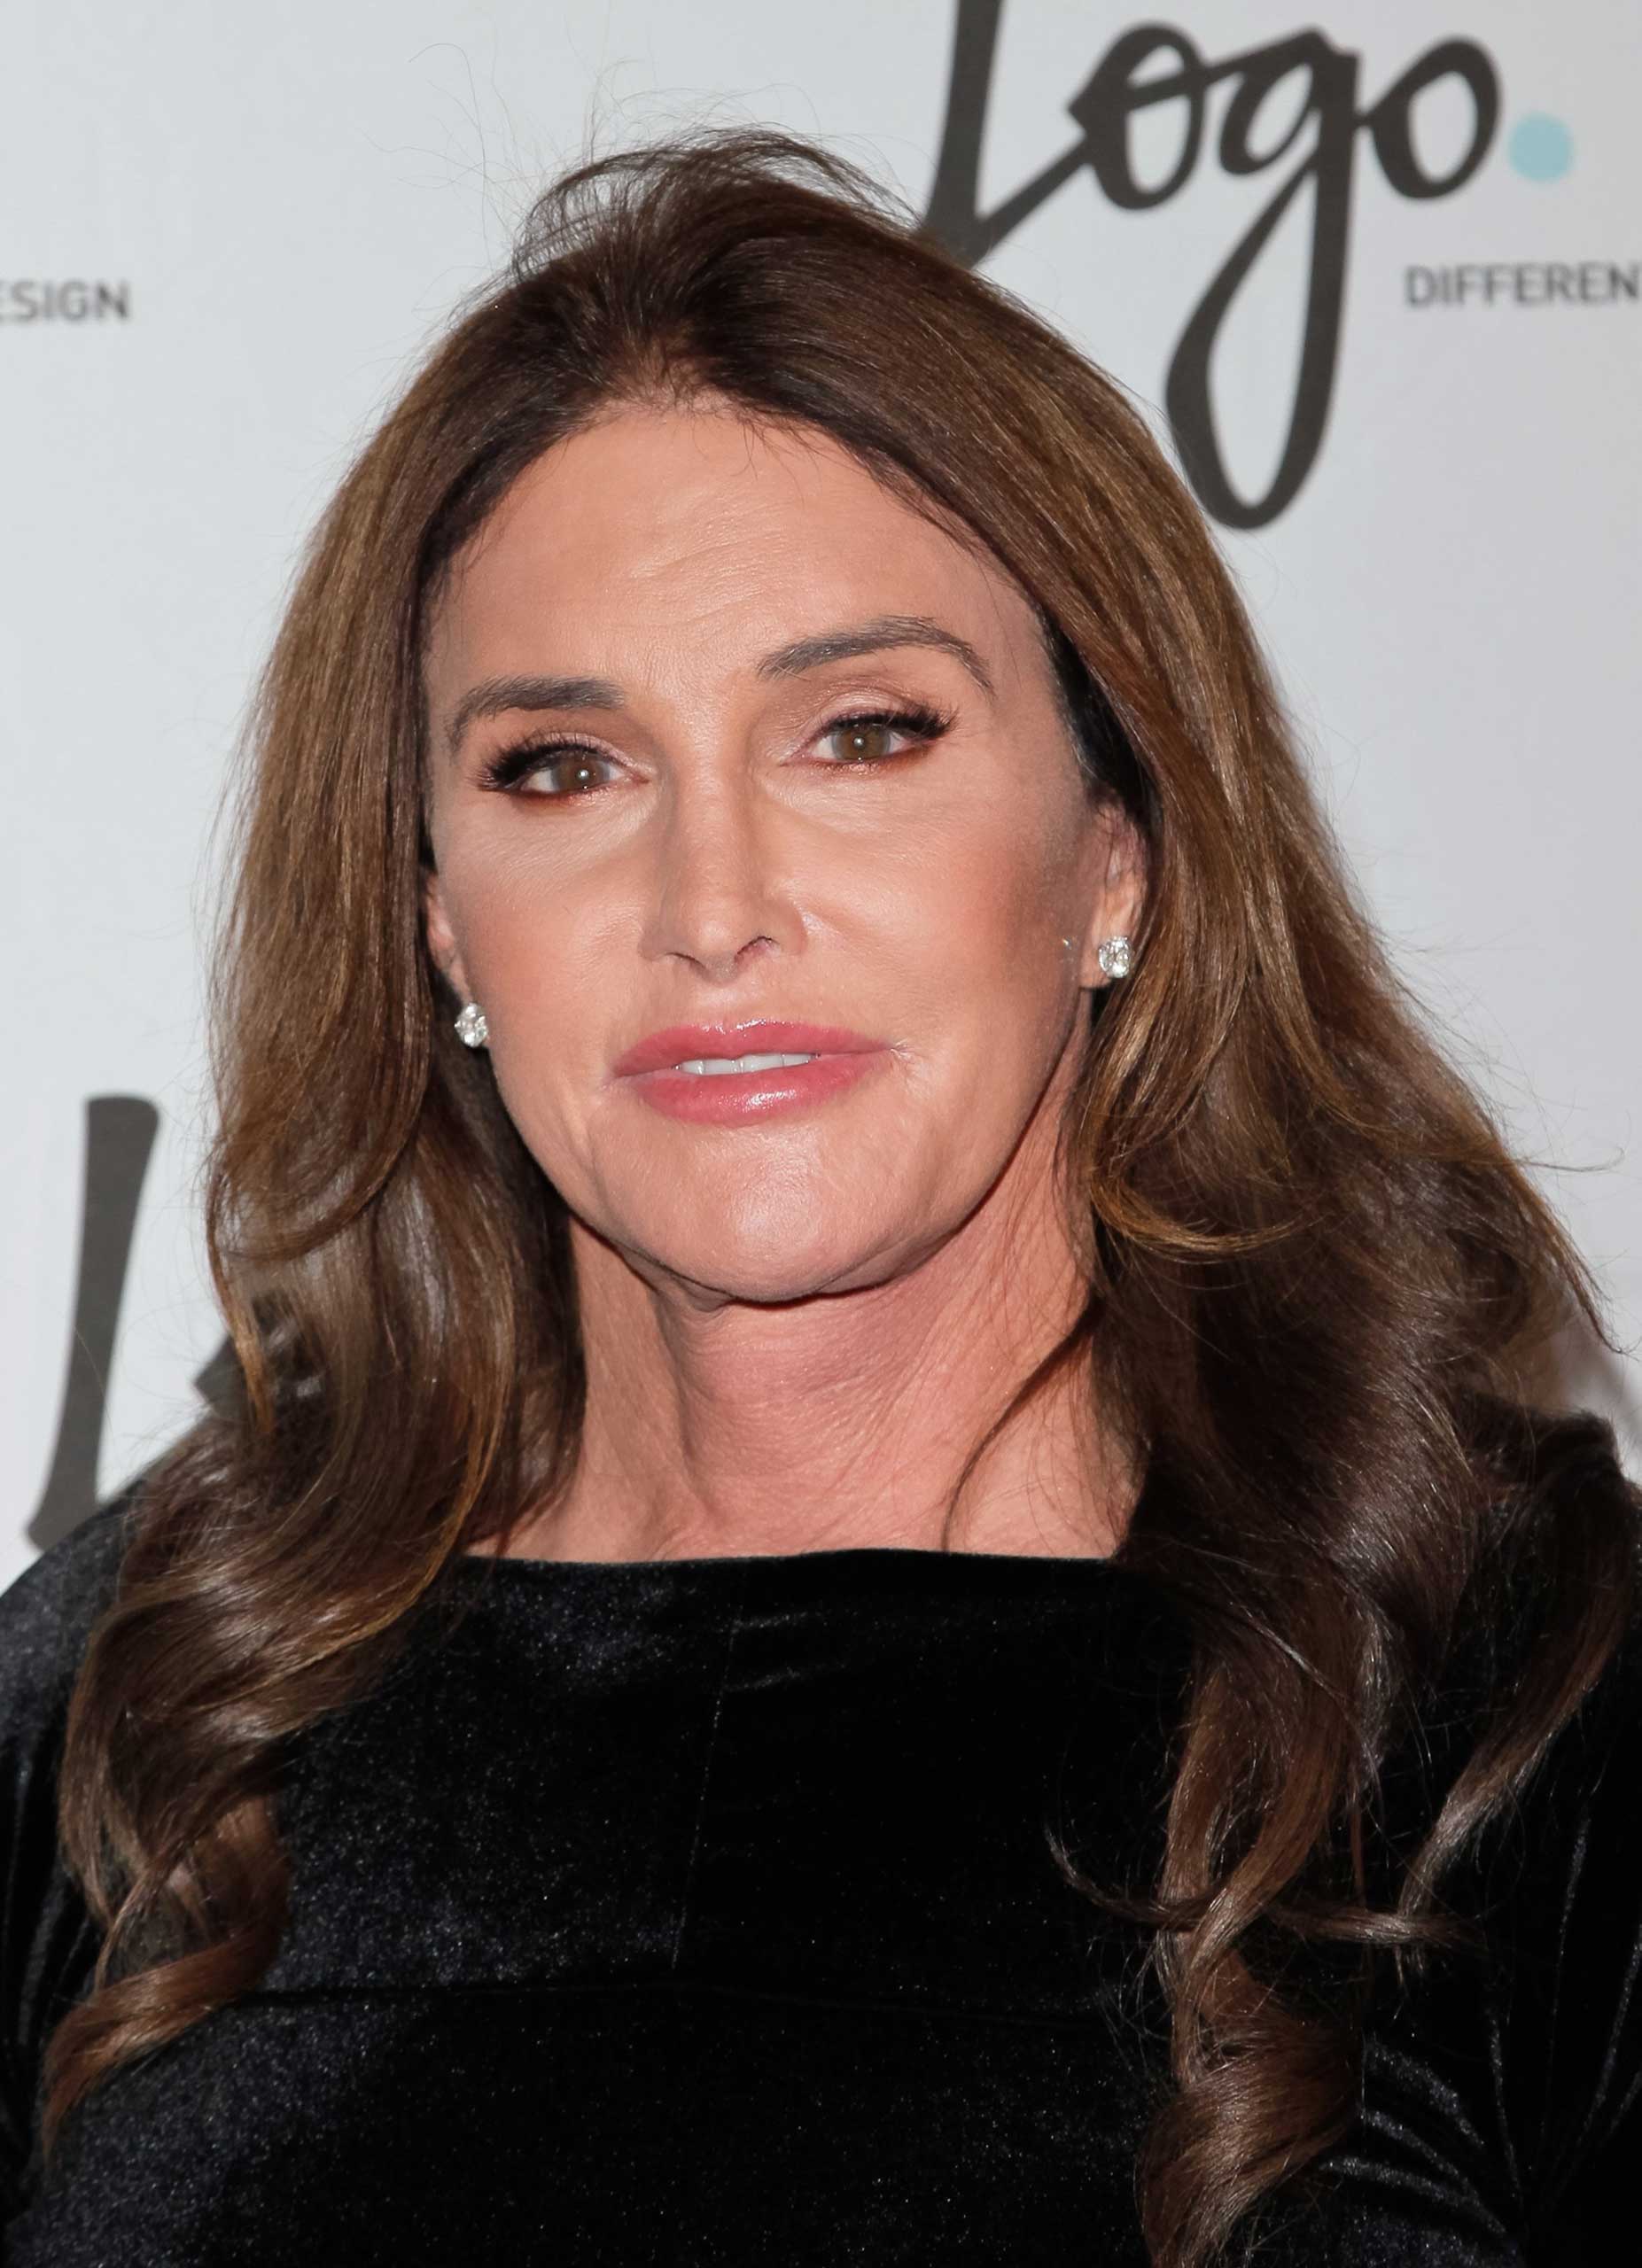 Caitlyn Jenner attends Logo TV's 'Beautiful As I Want To Be' web series launch party at The Standard Hotel in Los Angeles, on Oct. 27, 2015. (Tibrina Hobson—Getty Images)